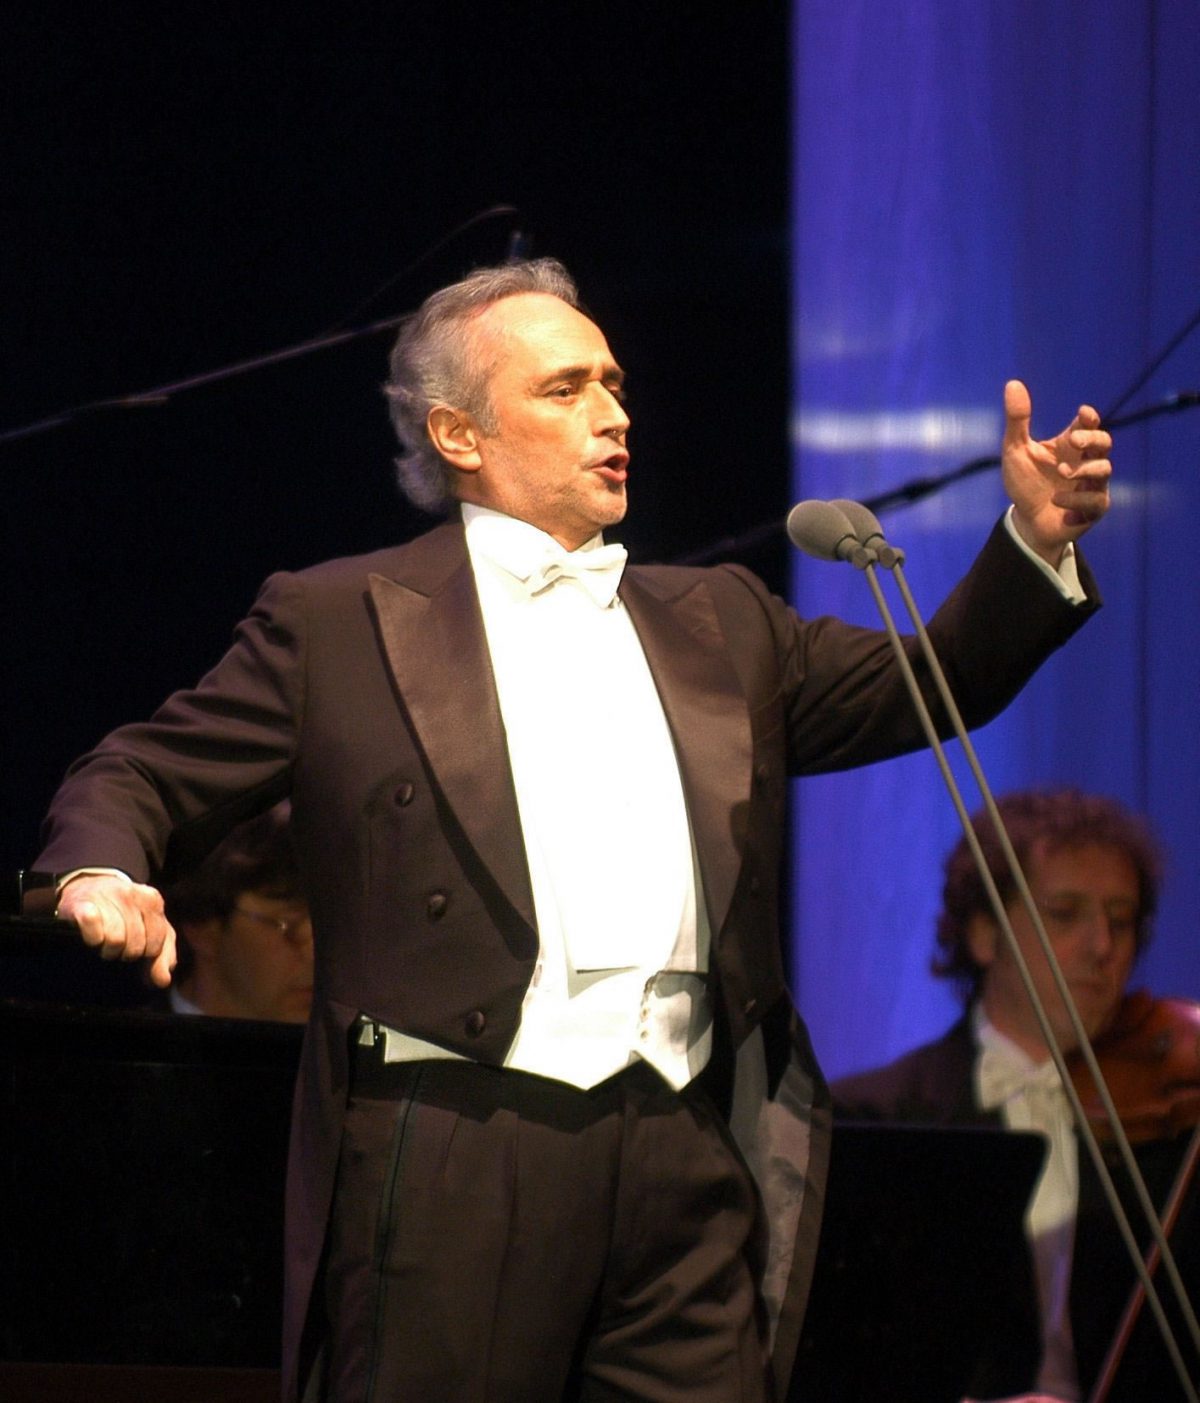 The World of KOTUR: A private audience with Jose Carreras